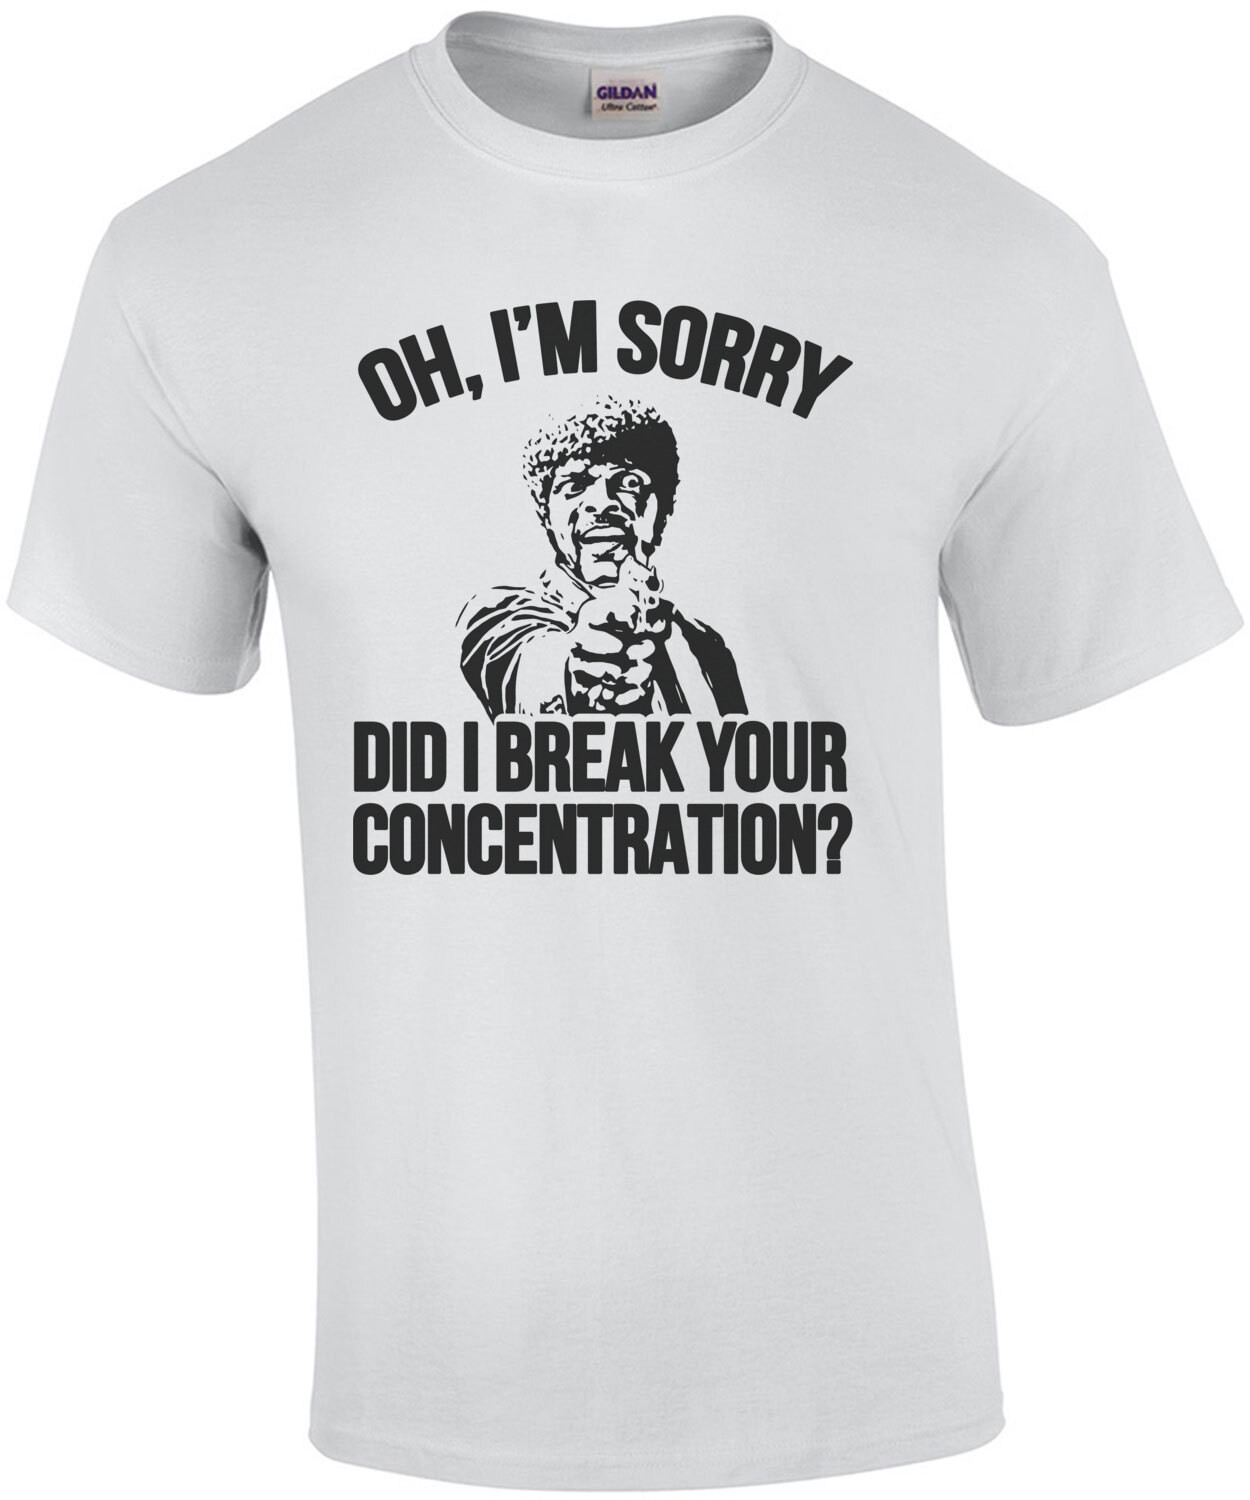 Oh, I'm sorry did I break your concentration. Samuel L. Jackson - Jules Winnfield - Pulp Fiction 90's T-Shirt